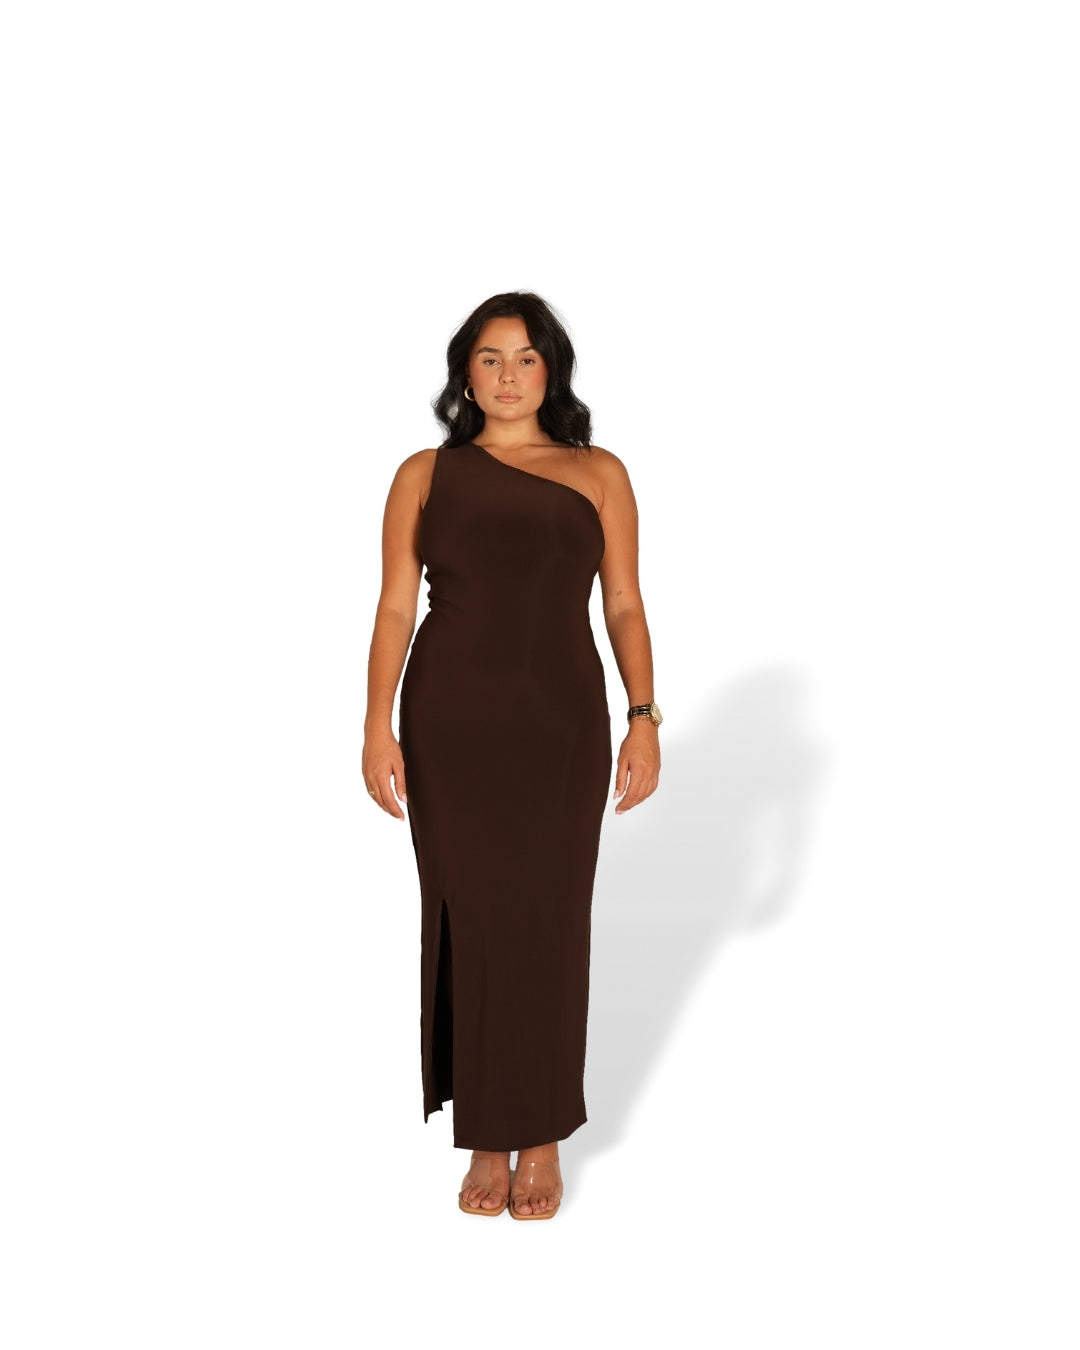 Chocolate Brown One Shoulder Cocktail Dress